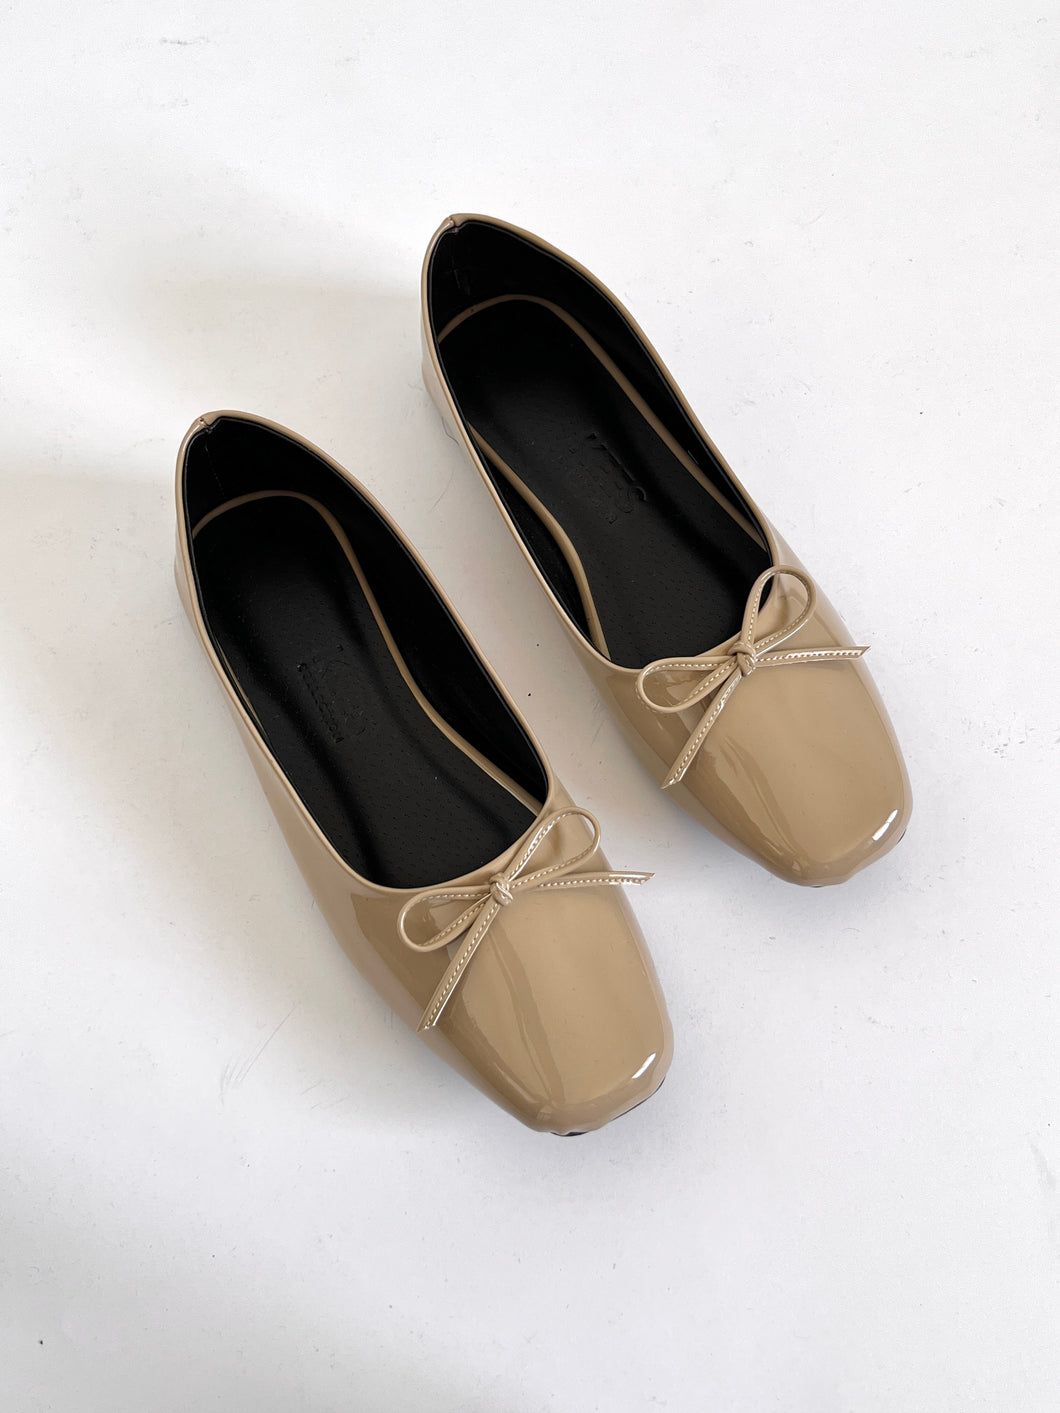 The Tali Shoes Patent Taupe